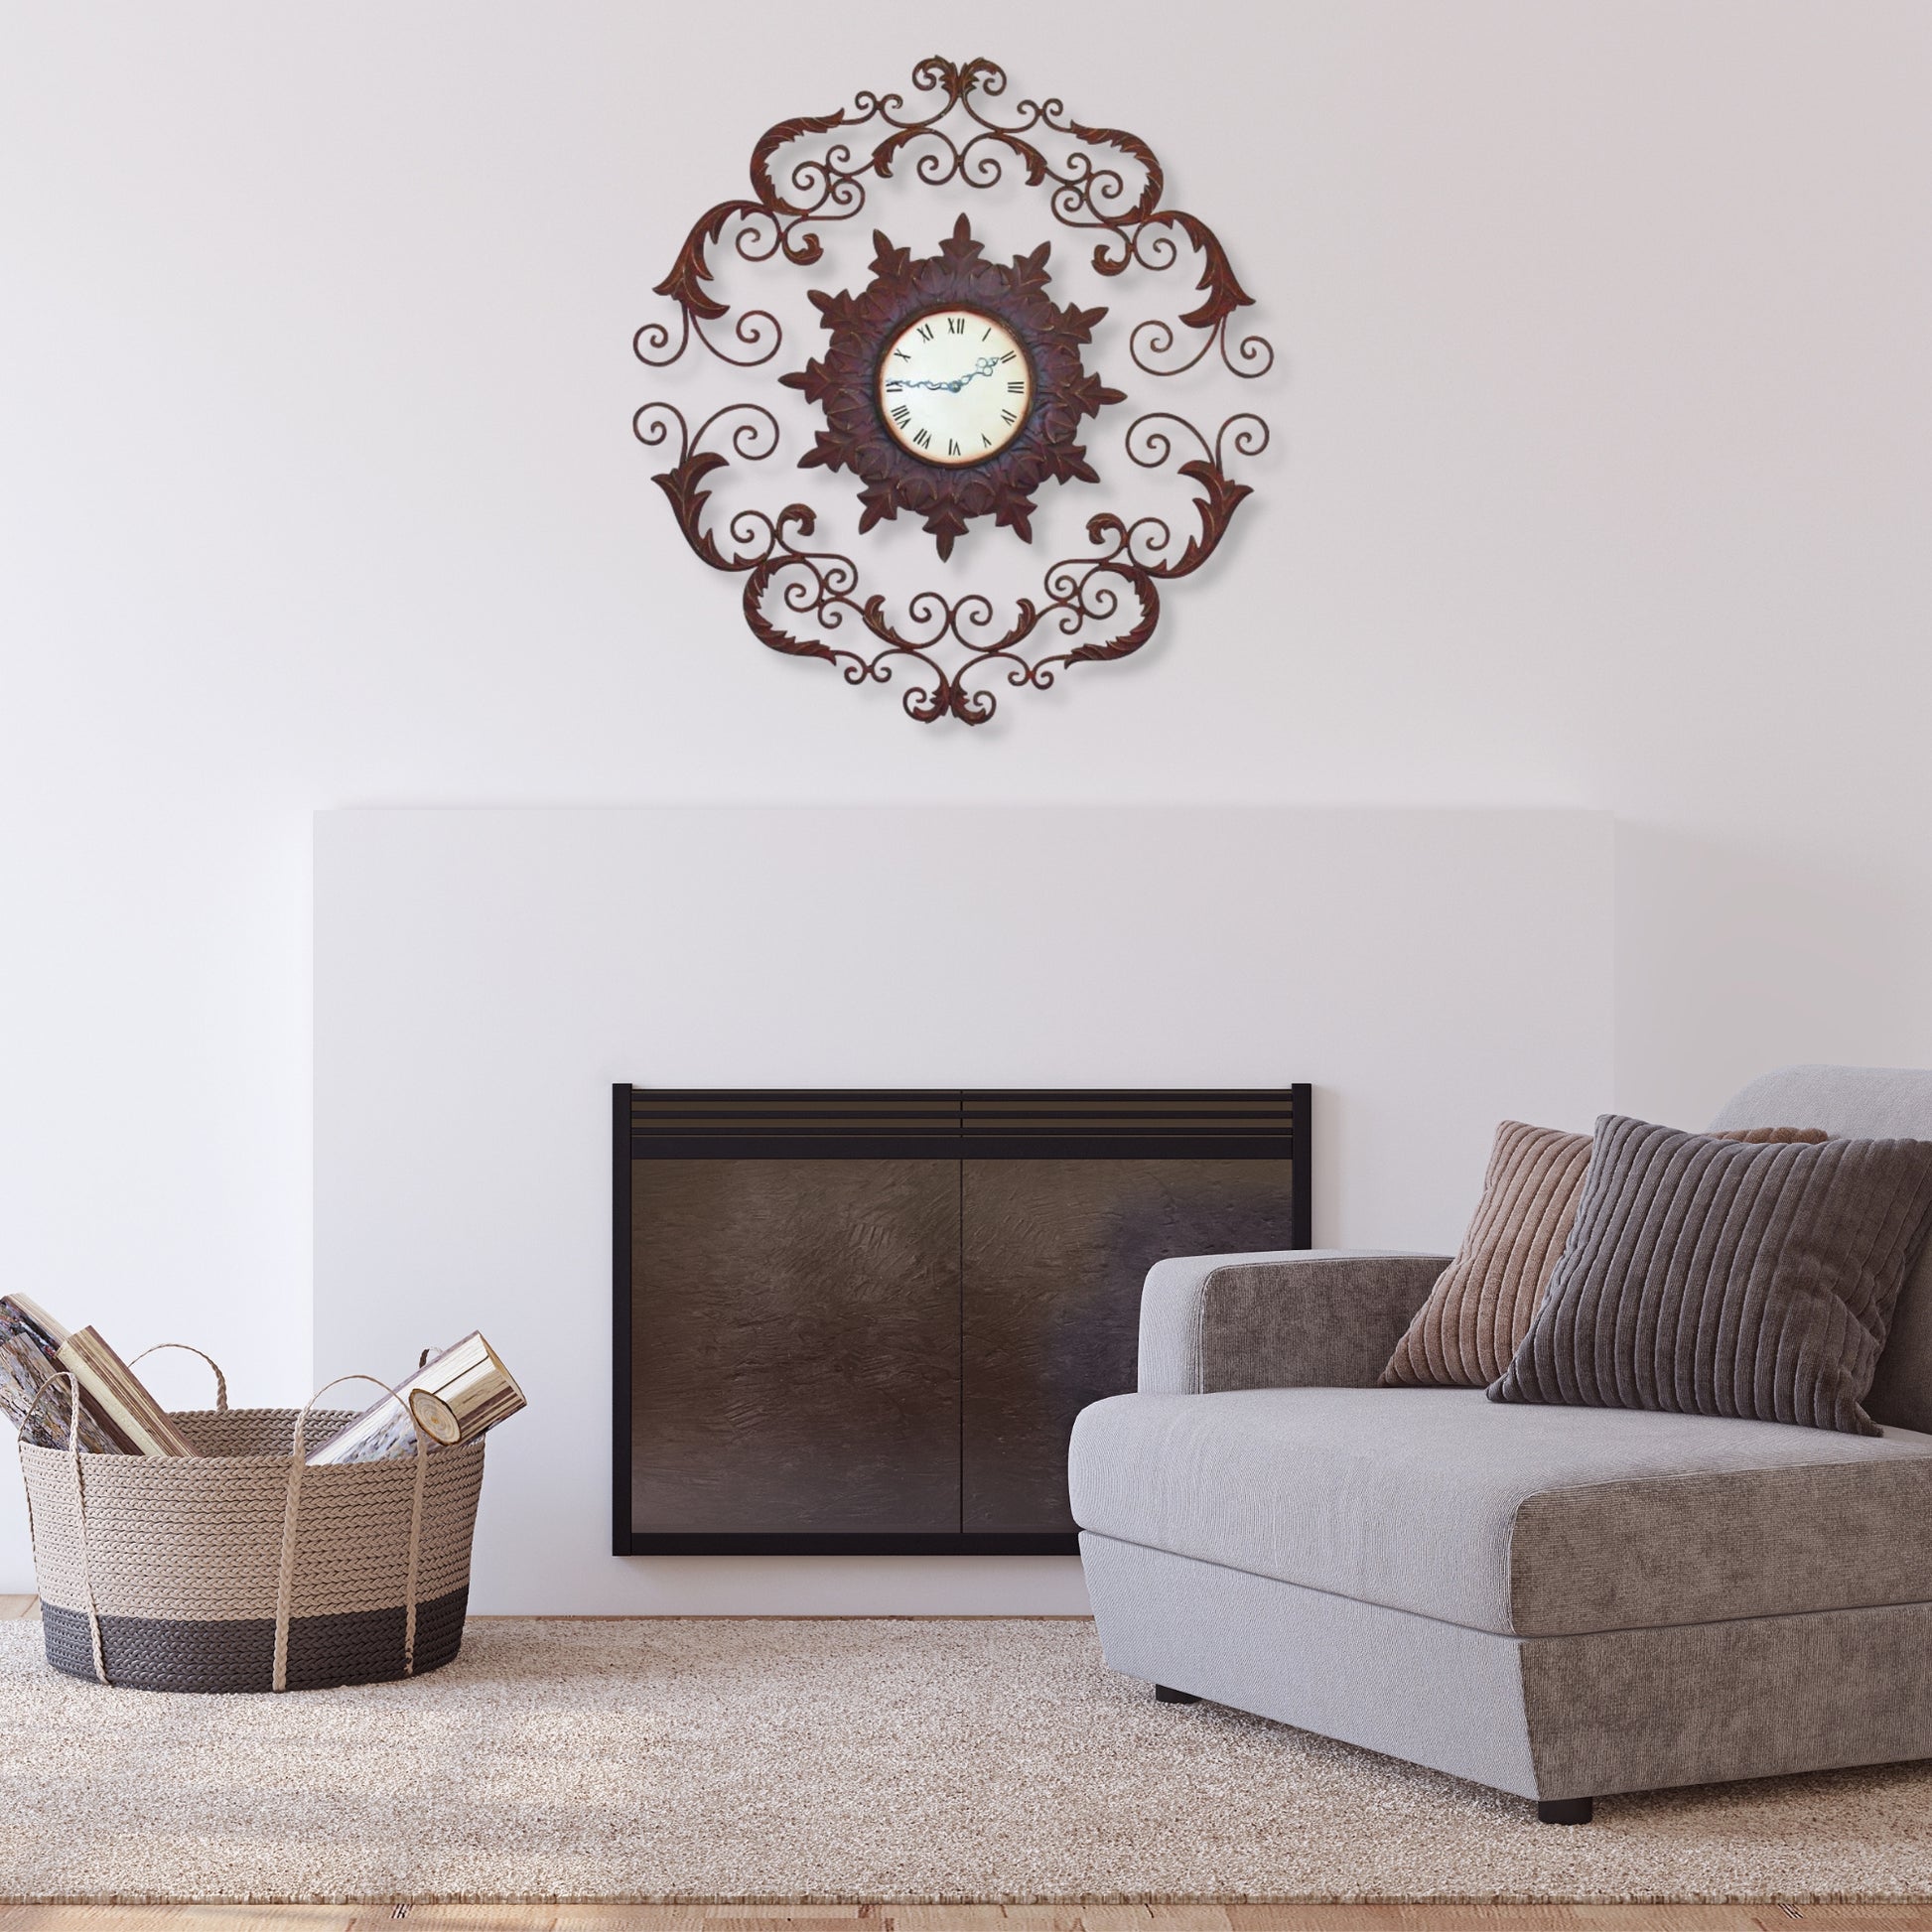 Large Iron Wall Clock with Leaf Accent - Ornate Iron Wall Clock (34") shown over fireplace in living room setting | INSIDE OUT | InsideOutCatalog.com